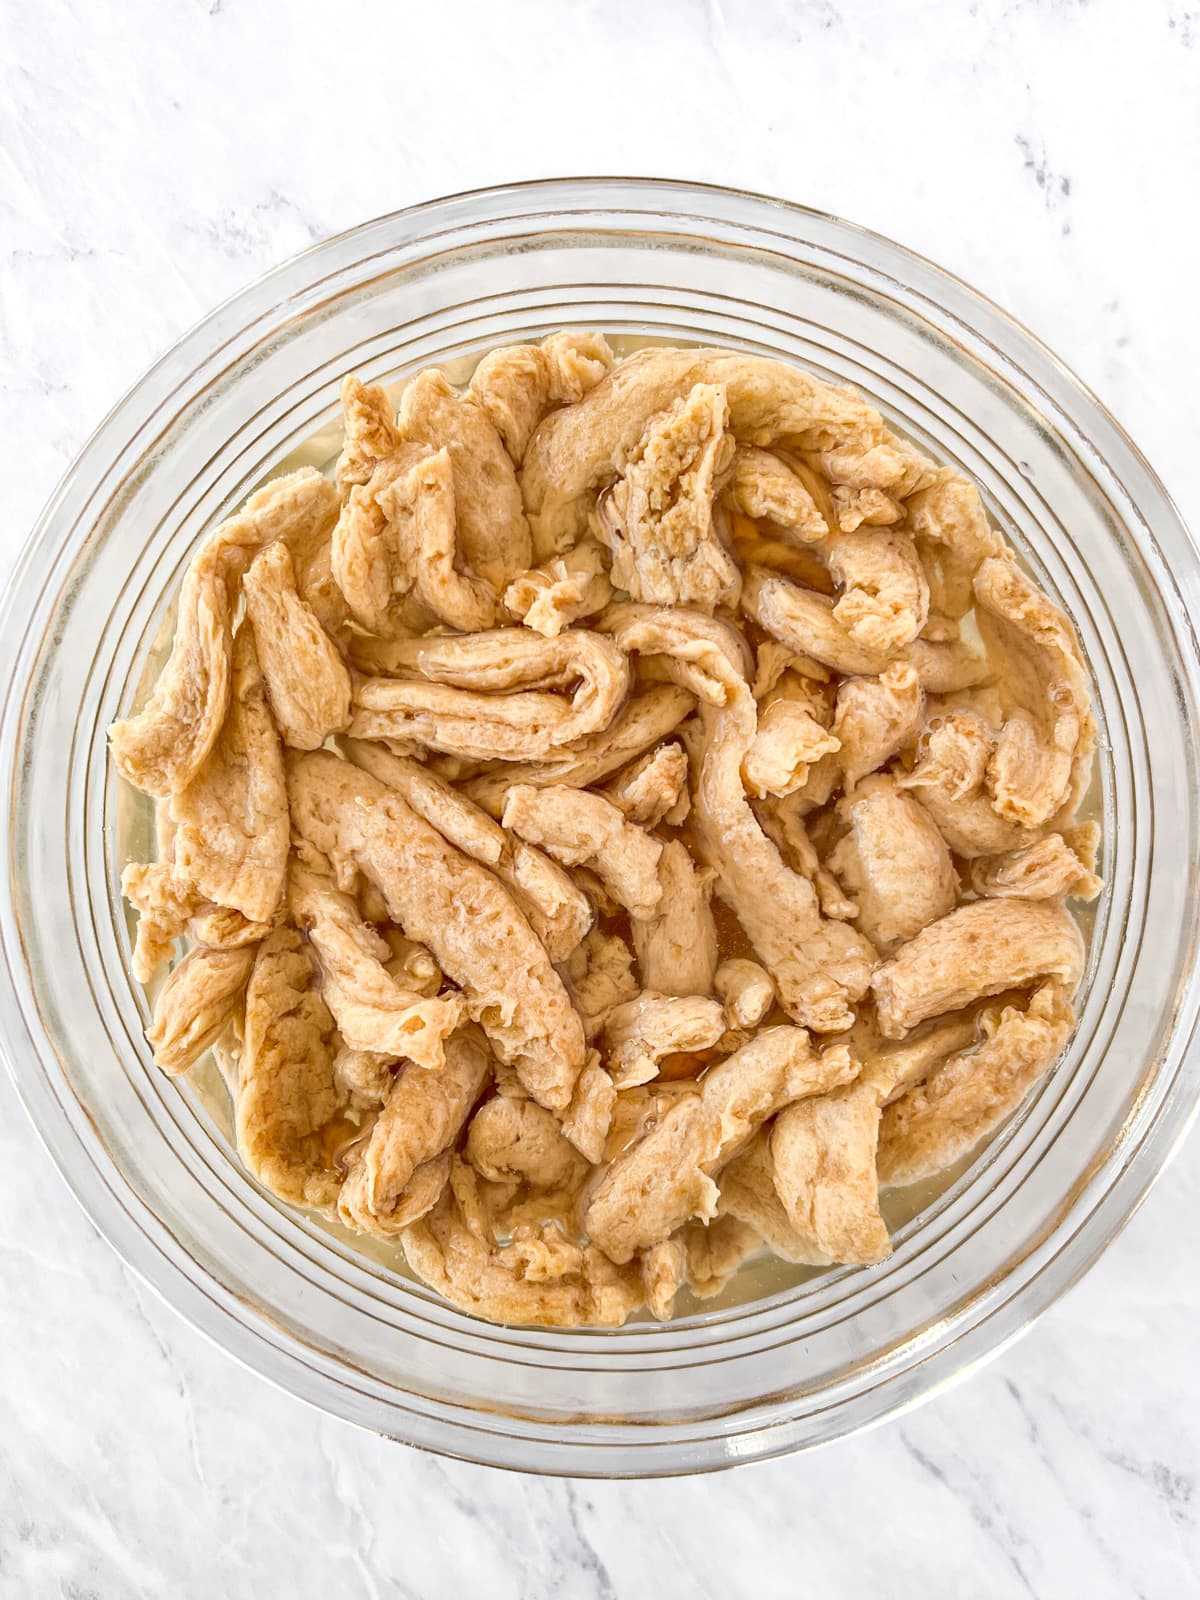 Soy curls in a bowl of water.